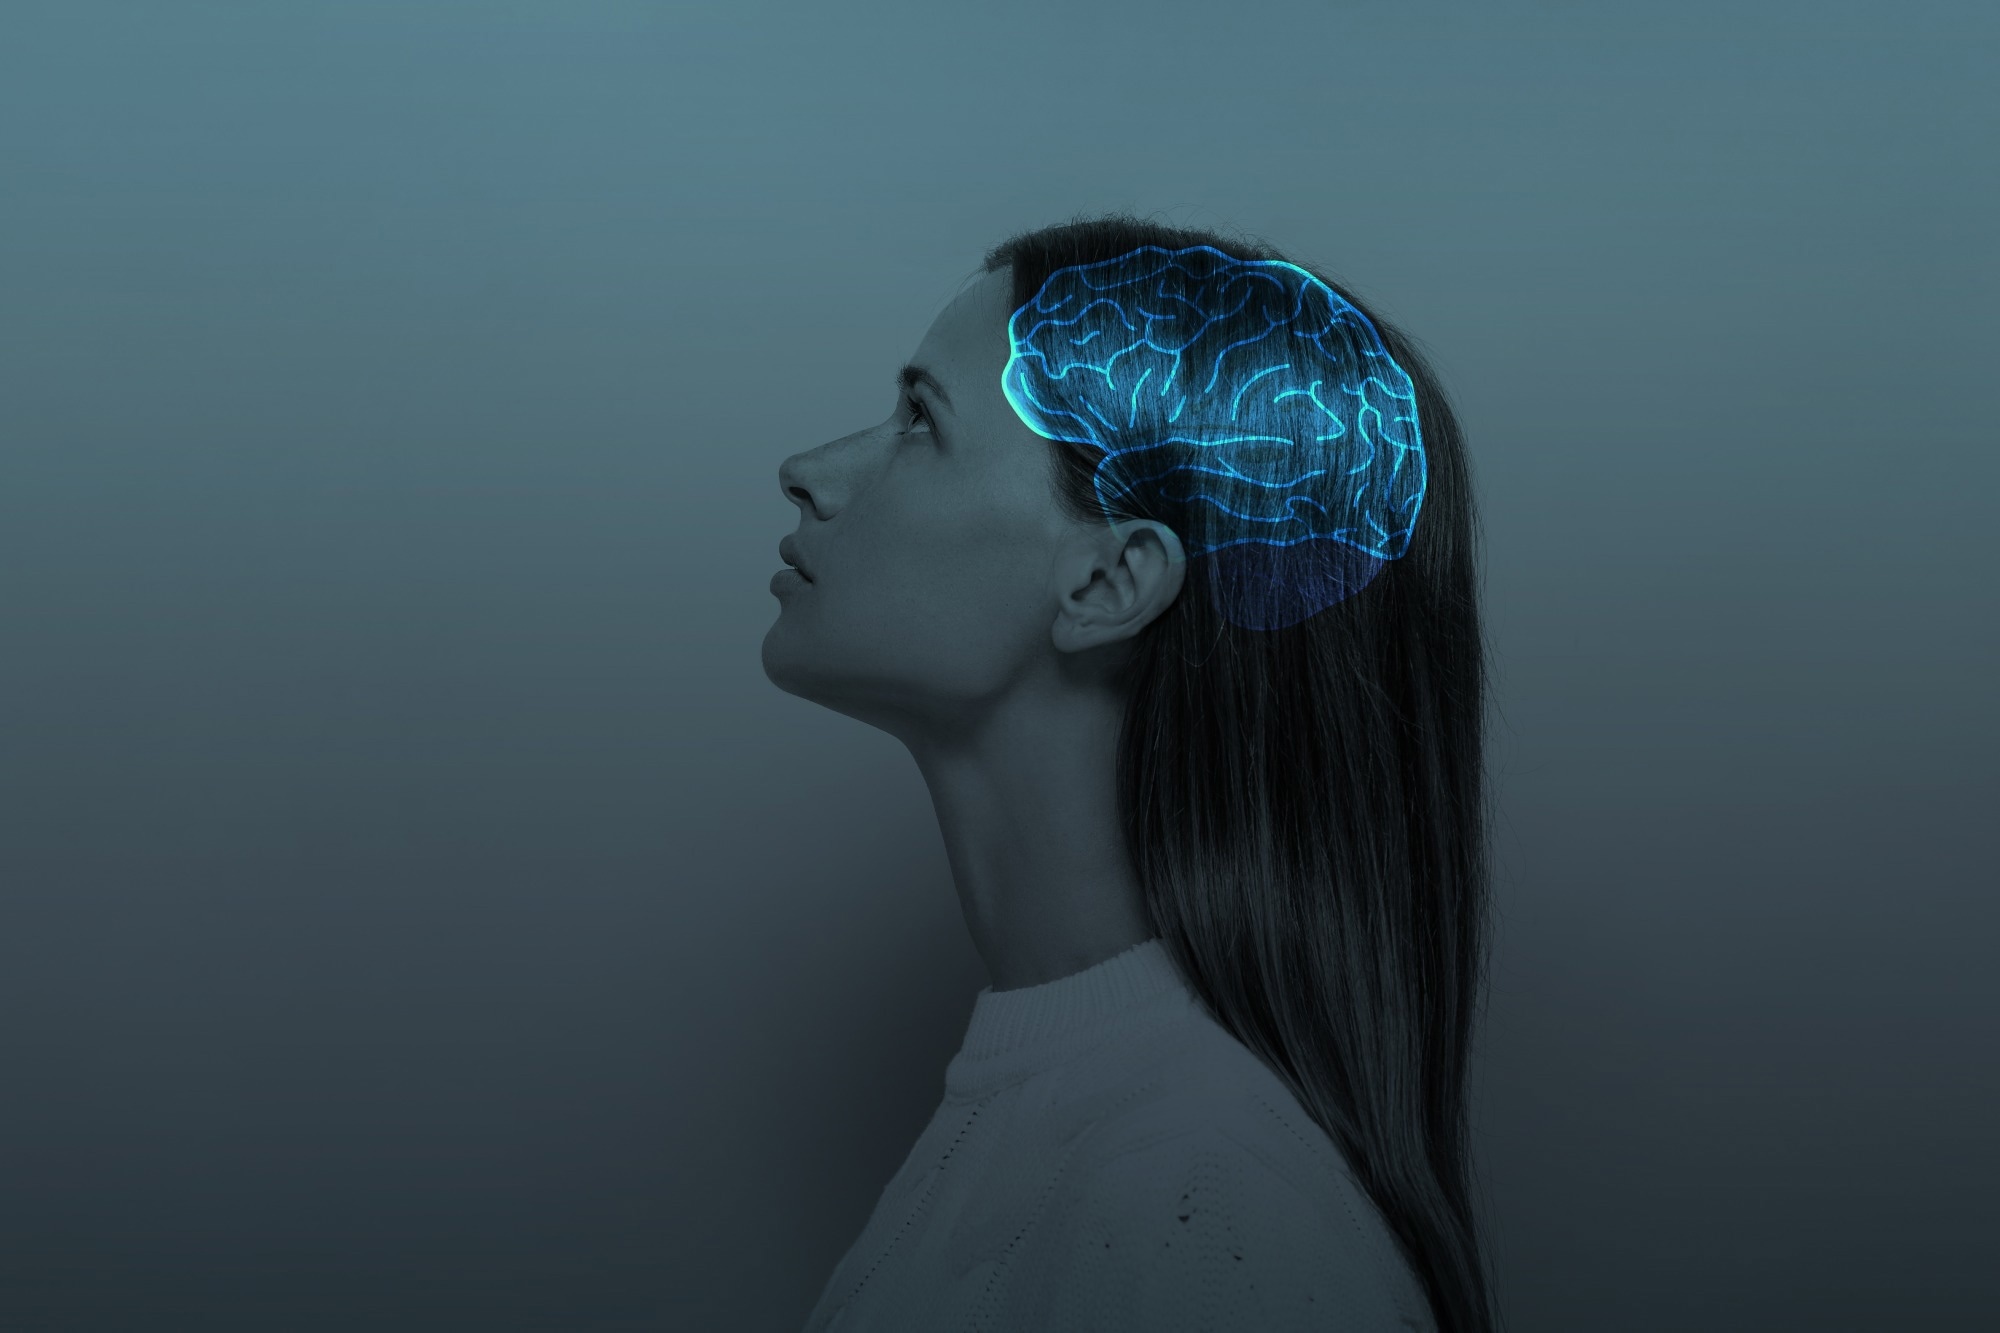 Study: Proteomic insights into mental health status: Plasma markers in young adults. Image Credit: Pavlova Yuliia / Shutterstock.com